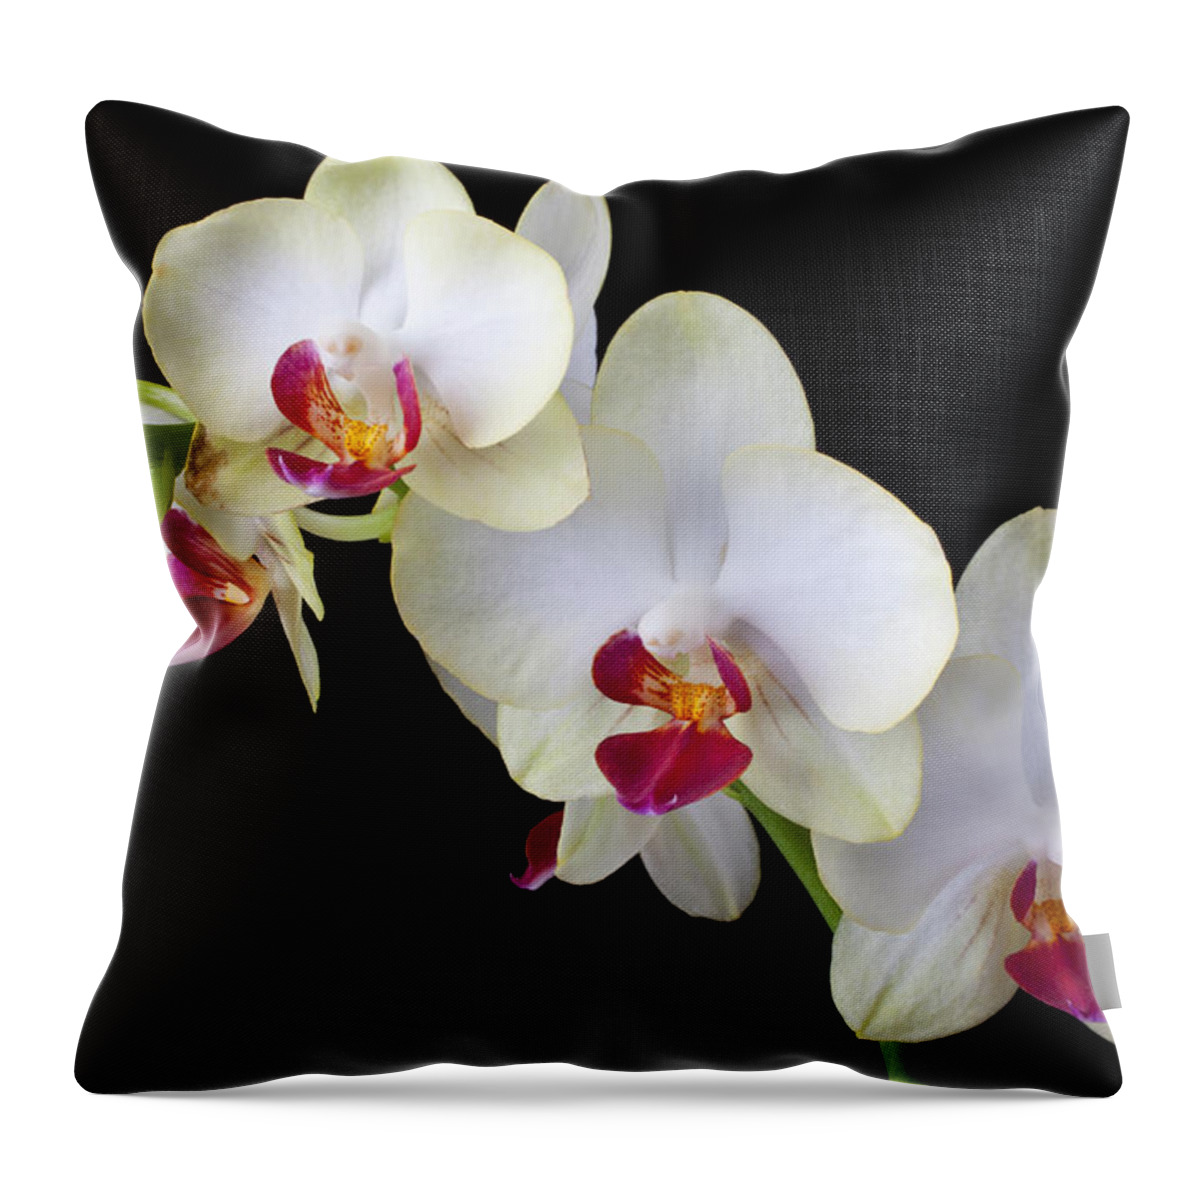 Beautiful Throw Pillow featuring the photograph Beautiful White Orchids by Garry Gay